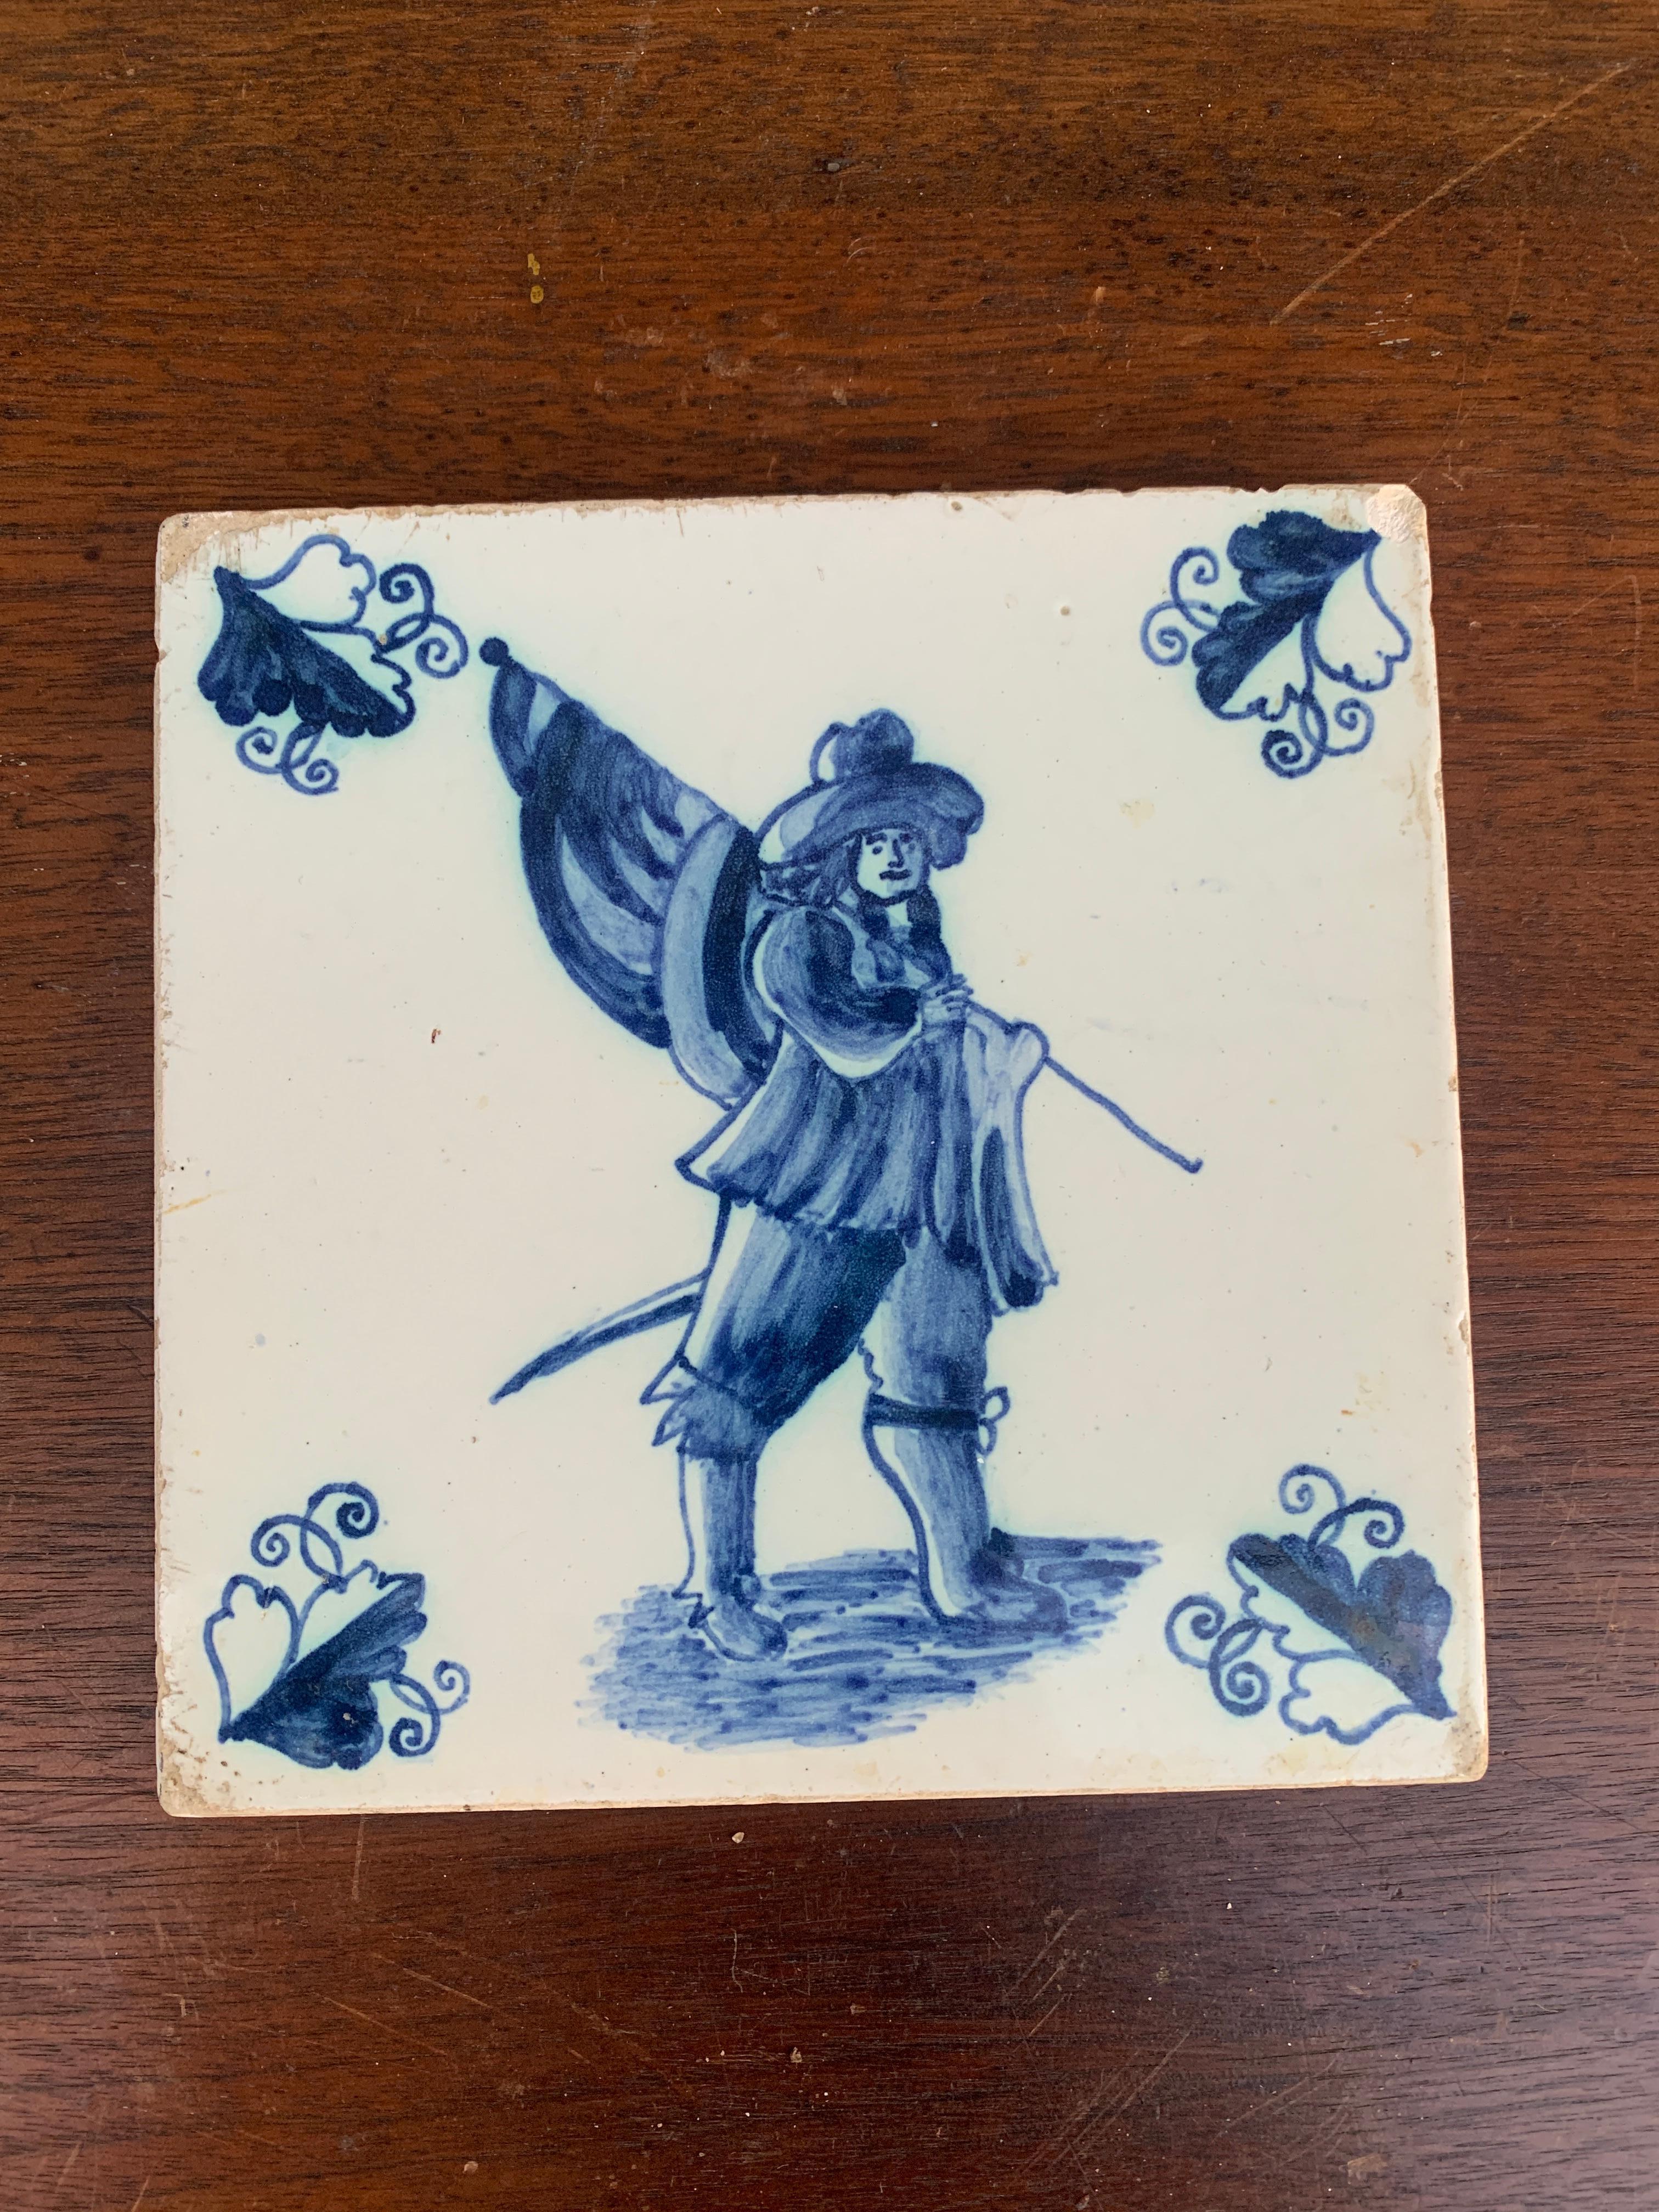 A beautiful antique hand painted blue and white Delft or French Provincial style ceramic tile featuring a soldier carrying a flag. This would make an excellent coaster.

Holland, Circa Mid-19th Century

Measures: 5.25